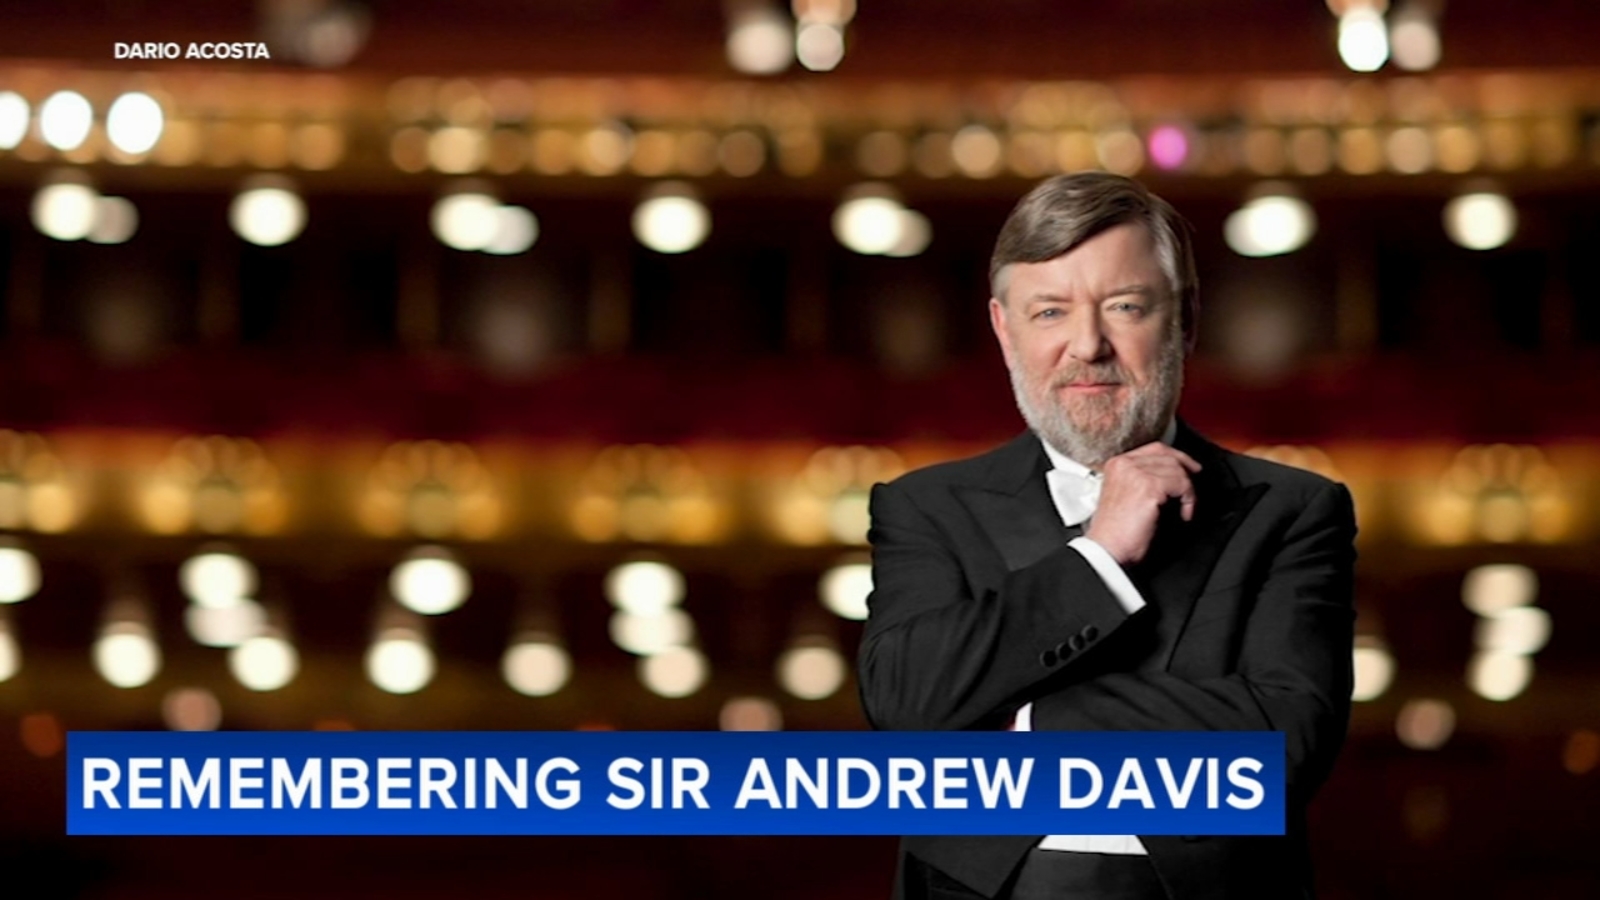 Conductor Sir Andrew Davis, who headed Lyric Opera of Chicago, dies at 80 in Chicago from leukemia [Video]